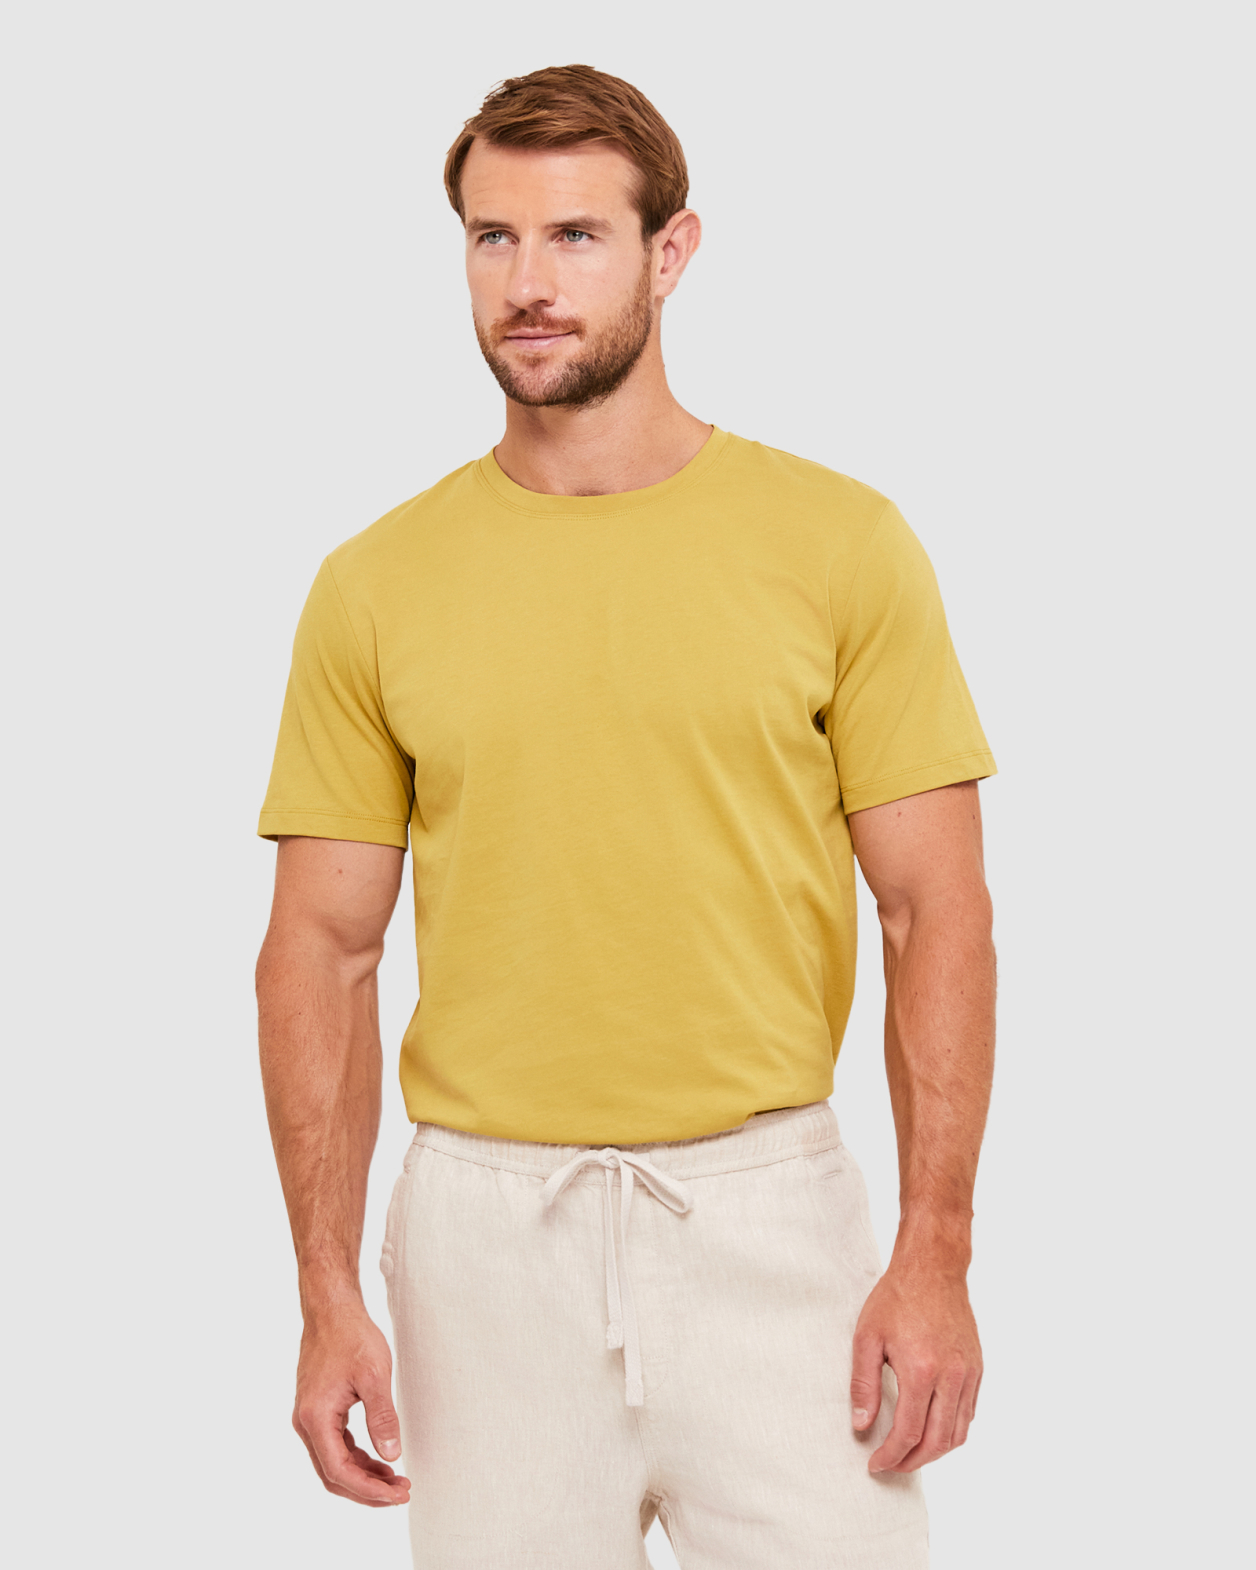 Super Soft Tee in CHARTREUSE